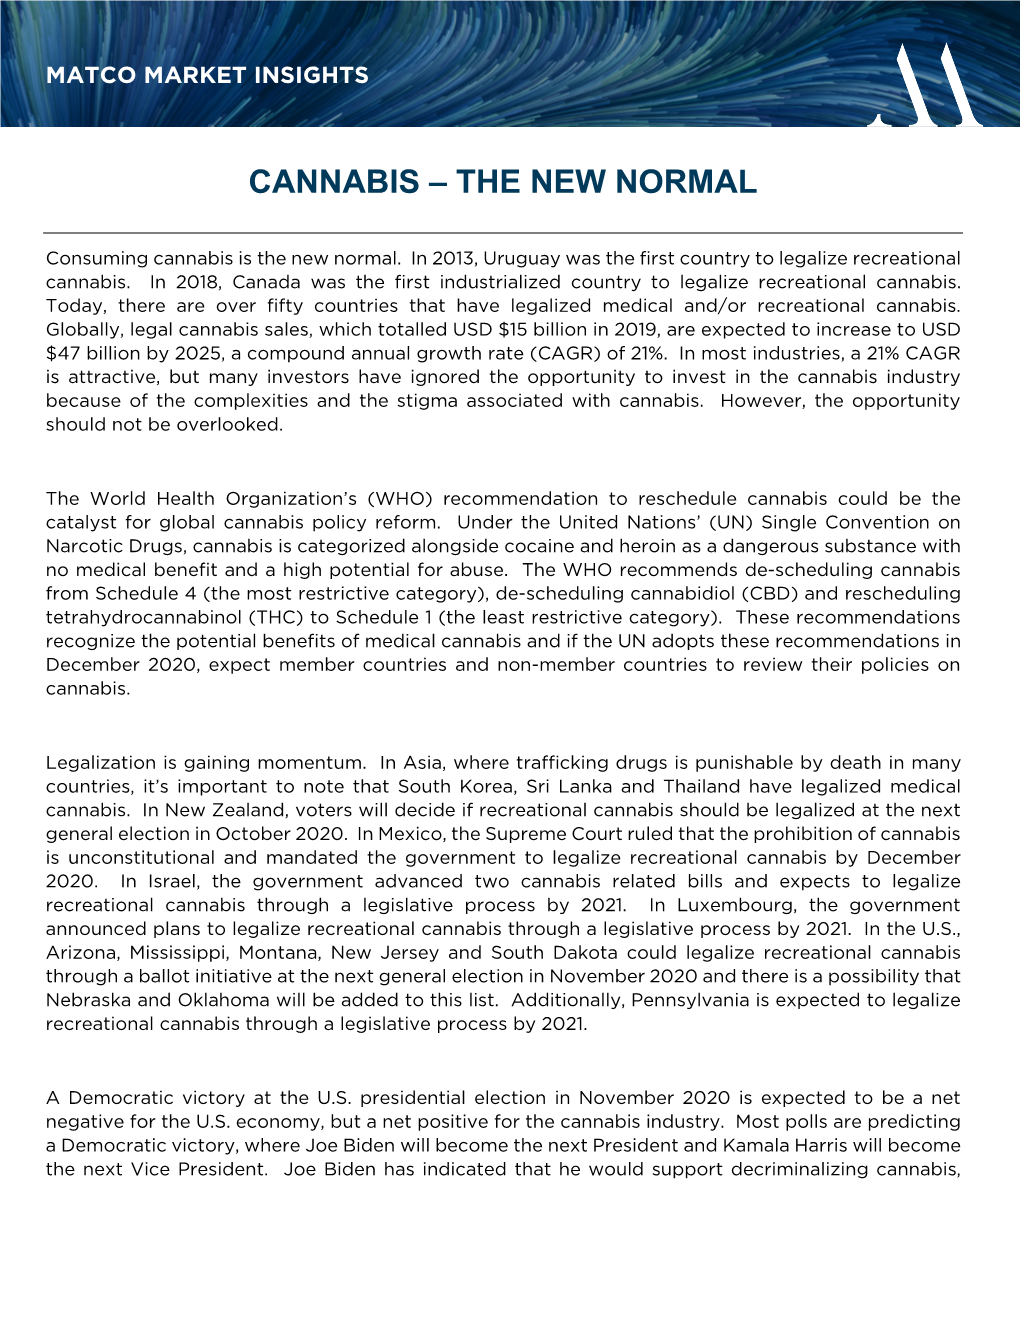 Cannabis – the New Normal